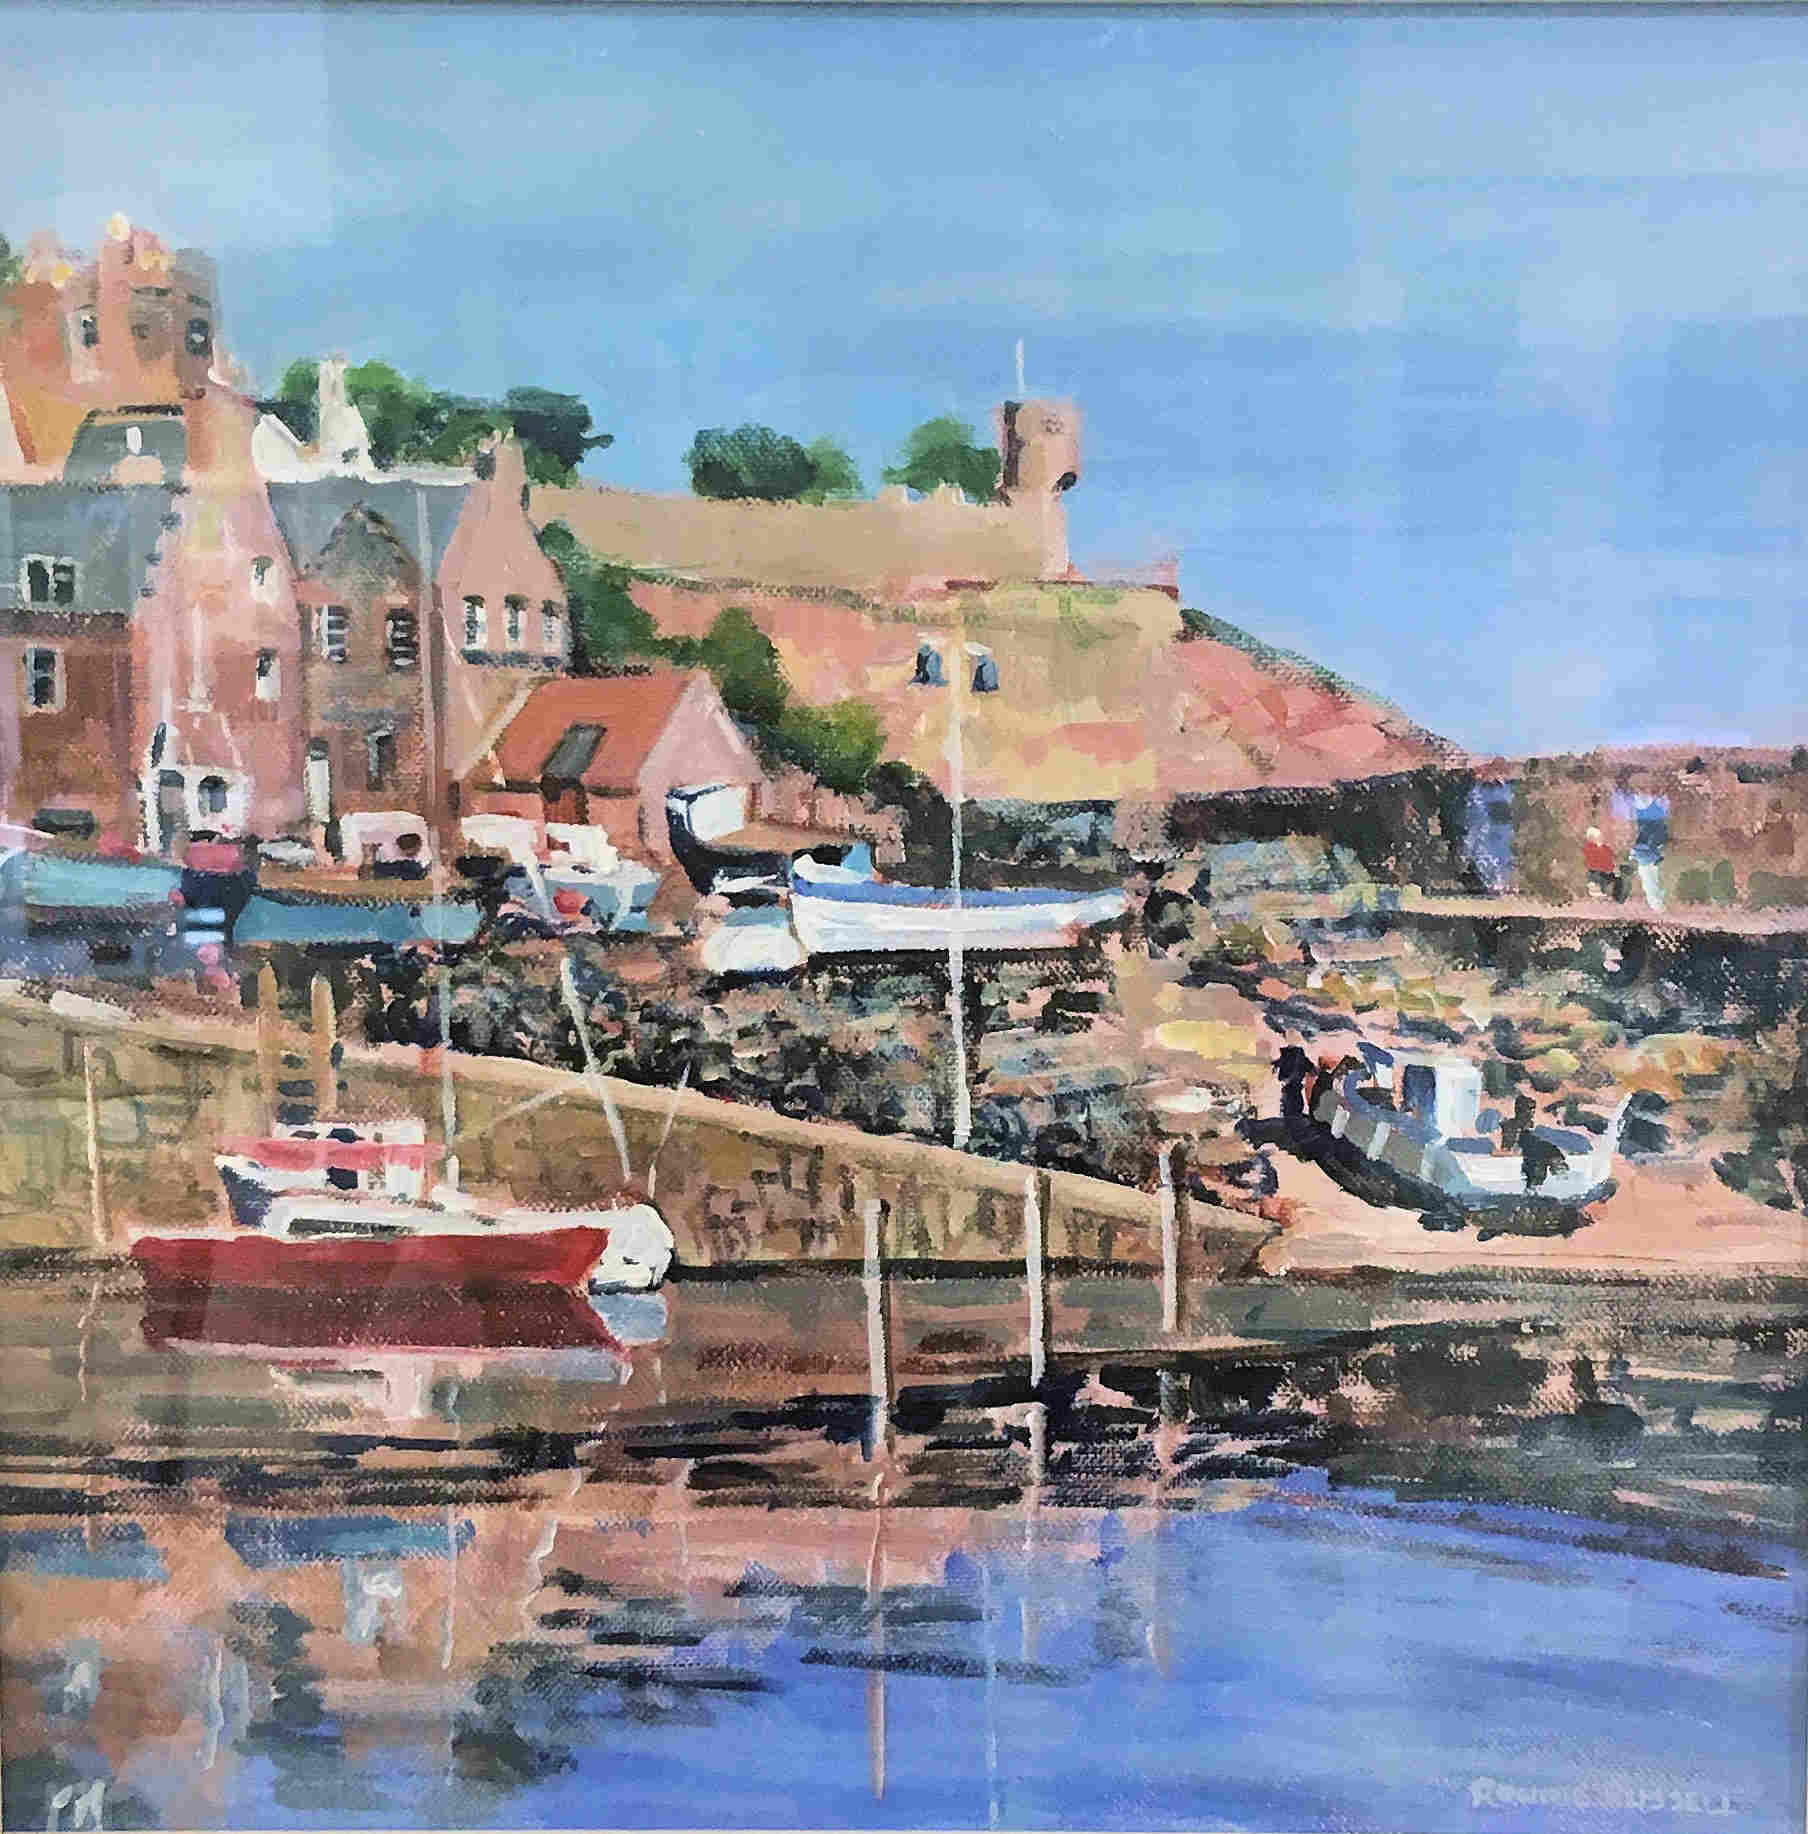 'Still Waters, Crail' by artist Ronnie Russell